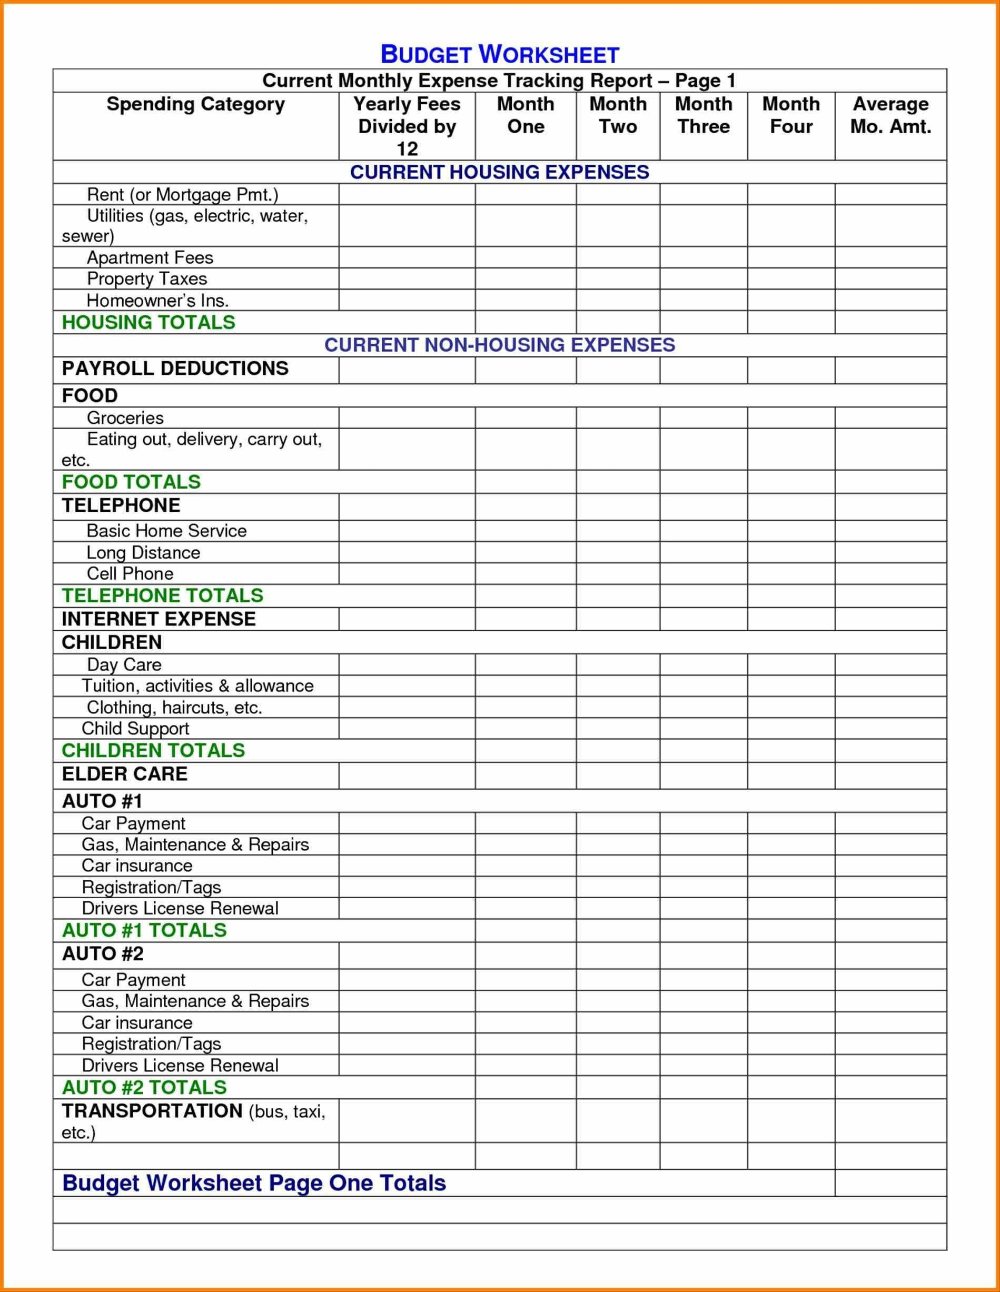 Small Business Annual Budget Template - Entrepreneur For Monthly Expenses Tracking Budget Template Pertaining To Monthly Expenses Tracking Budget Template